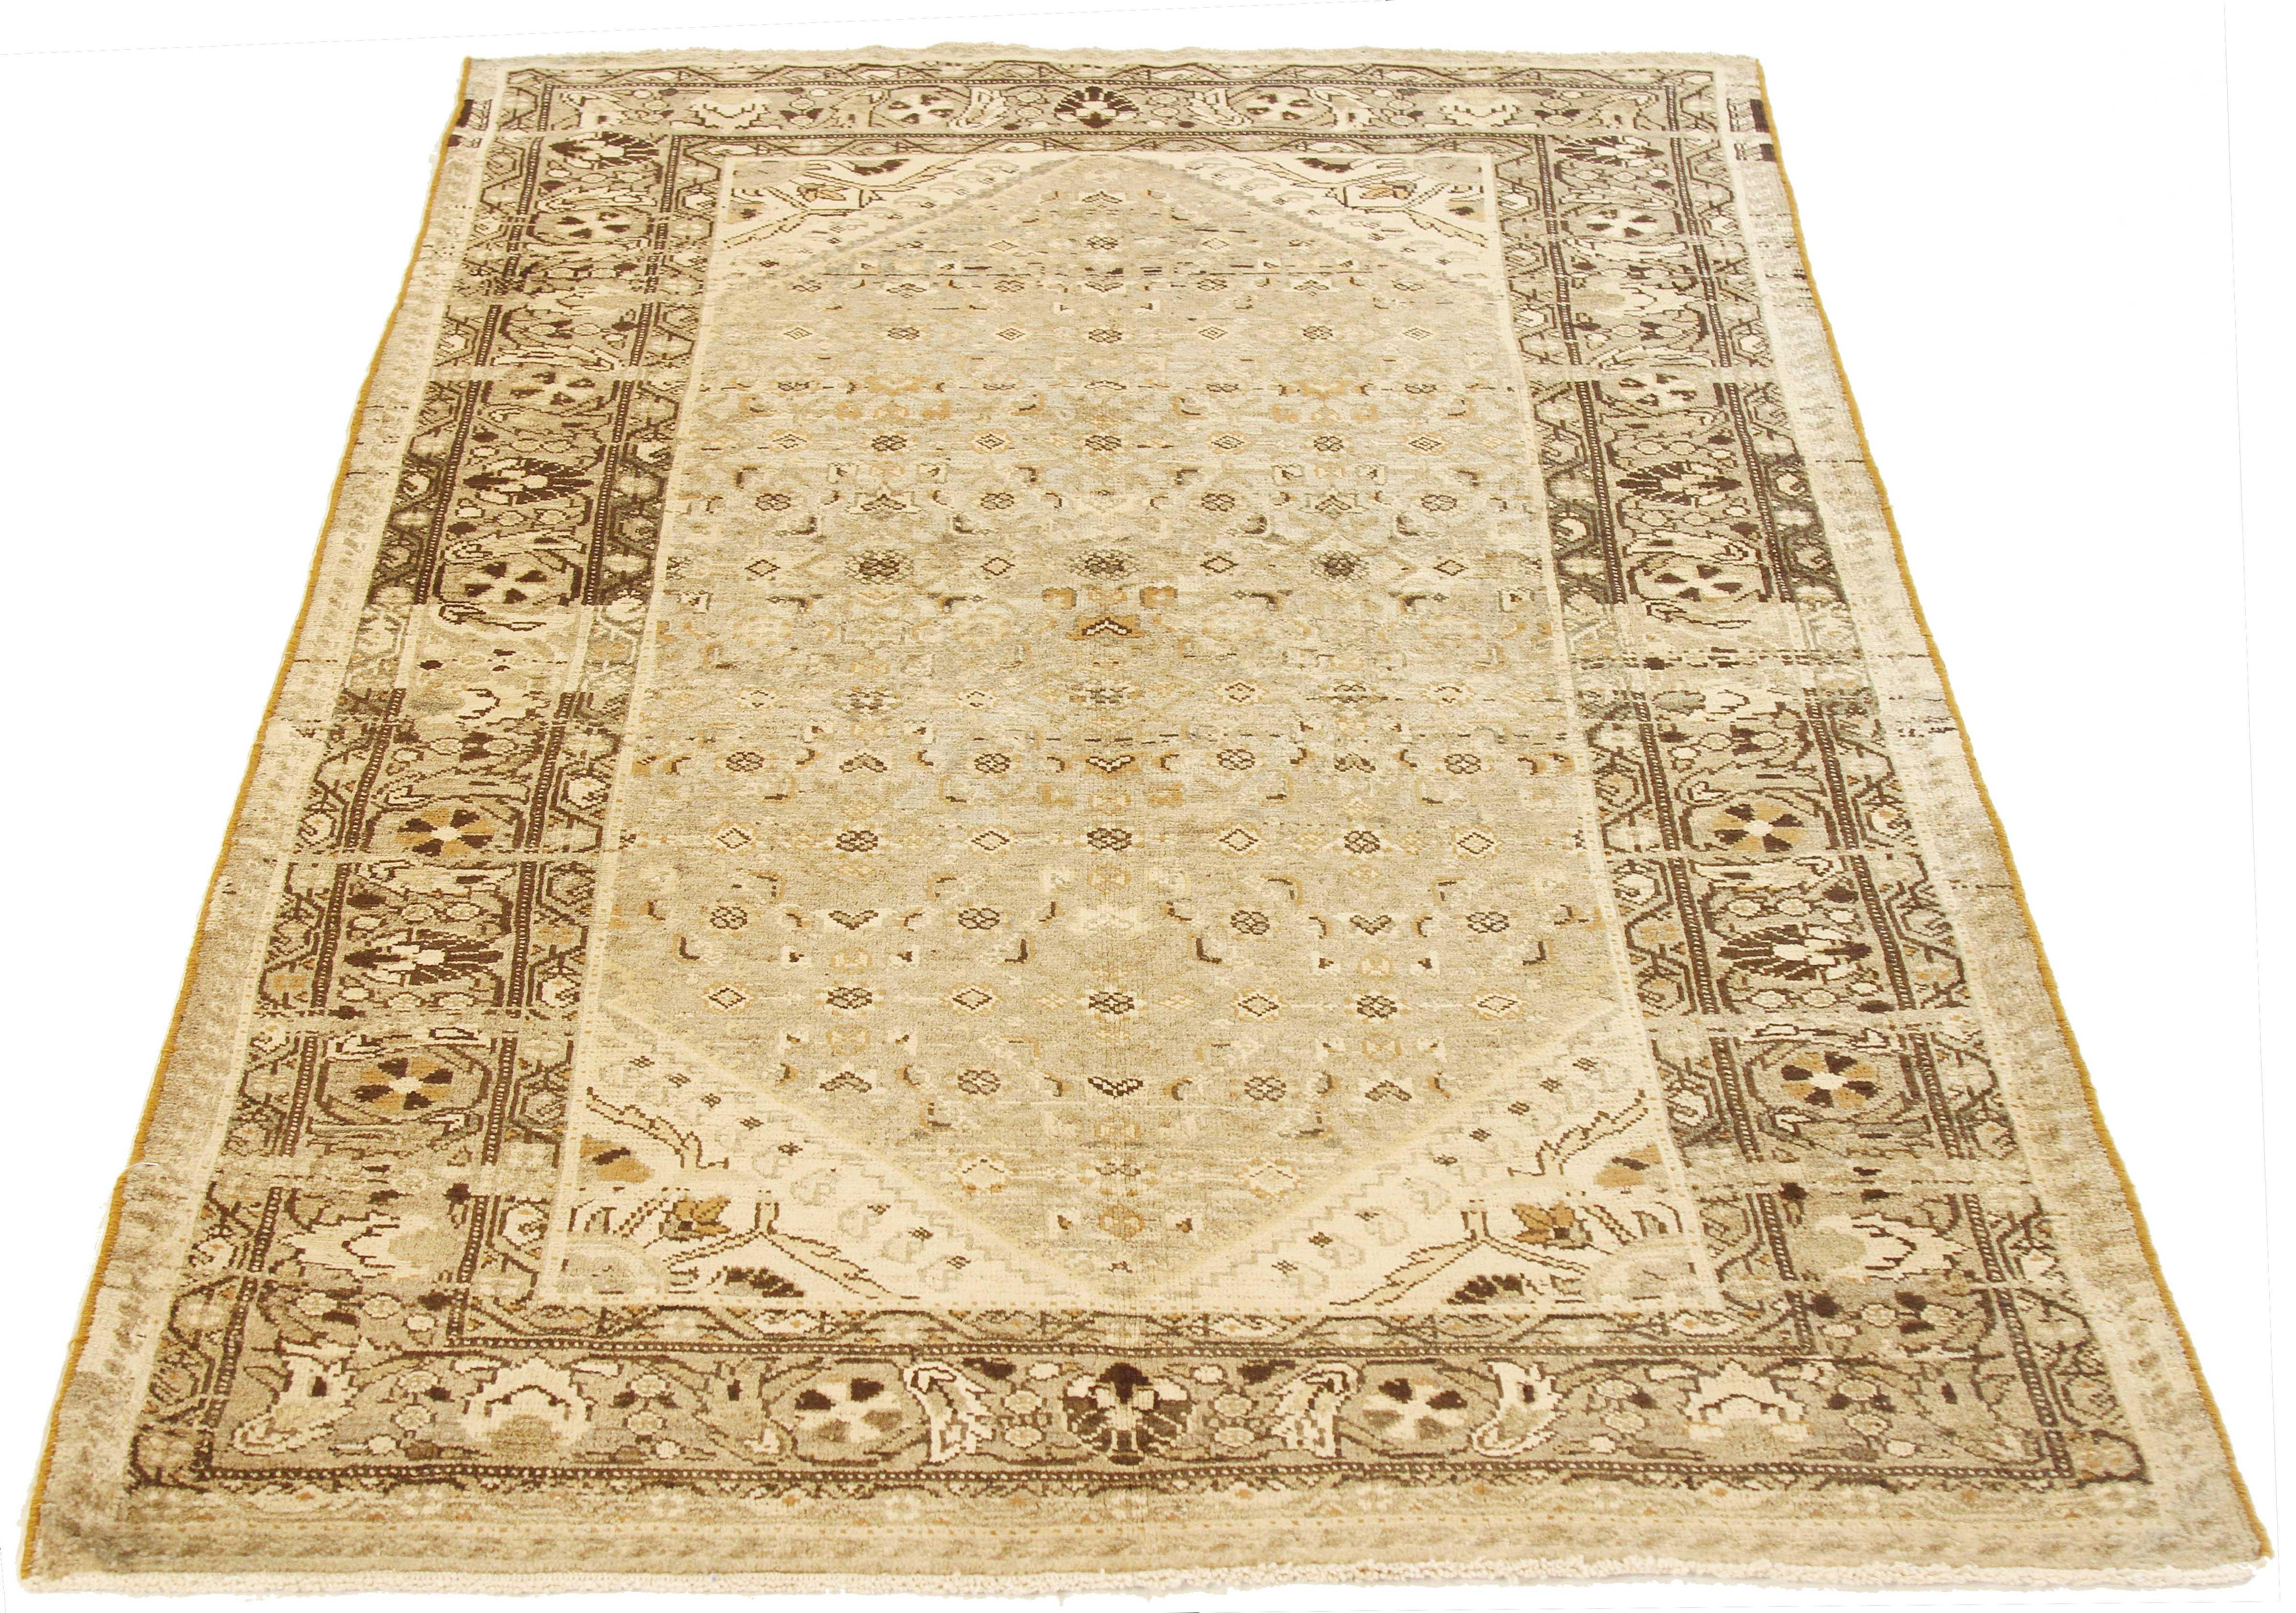 Antique Persian rug handwoven from the finest sheep’s wool and colored with all-natural vegetable dyes that are safe for humans and pets. It’s a traditional Malayer design featuring beige and brown floral details on an ivory field. It’s a lovely